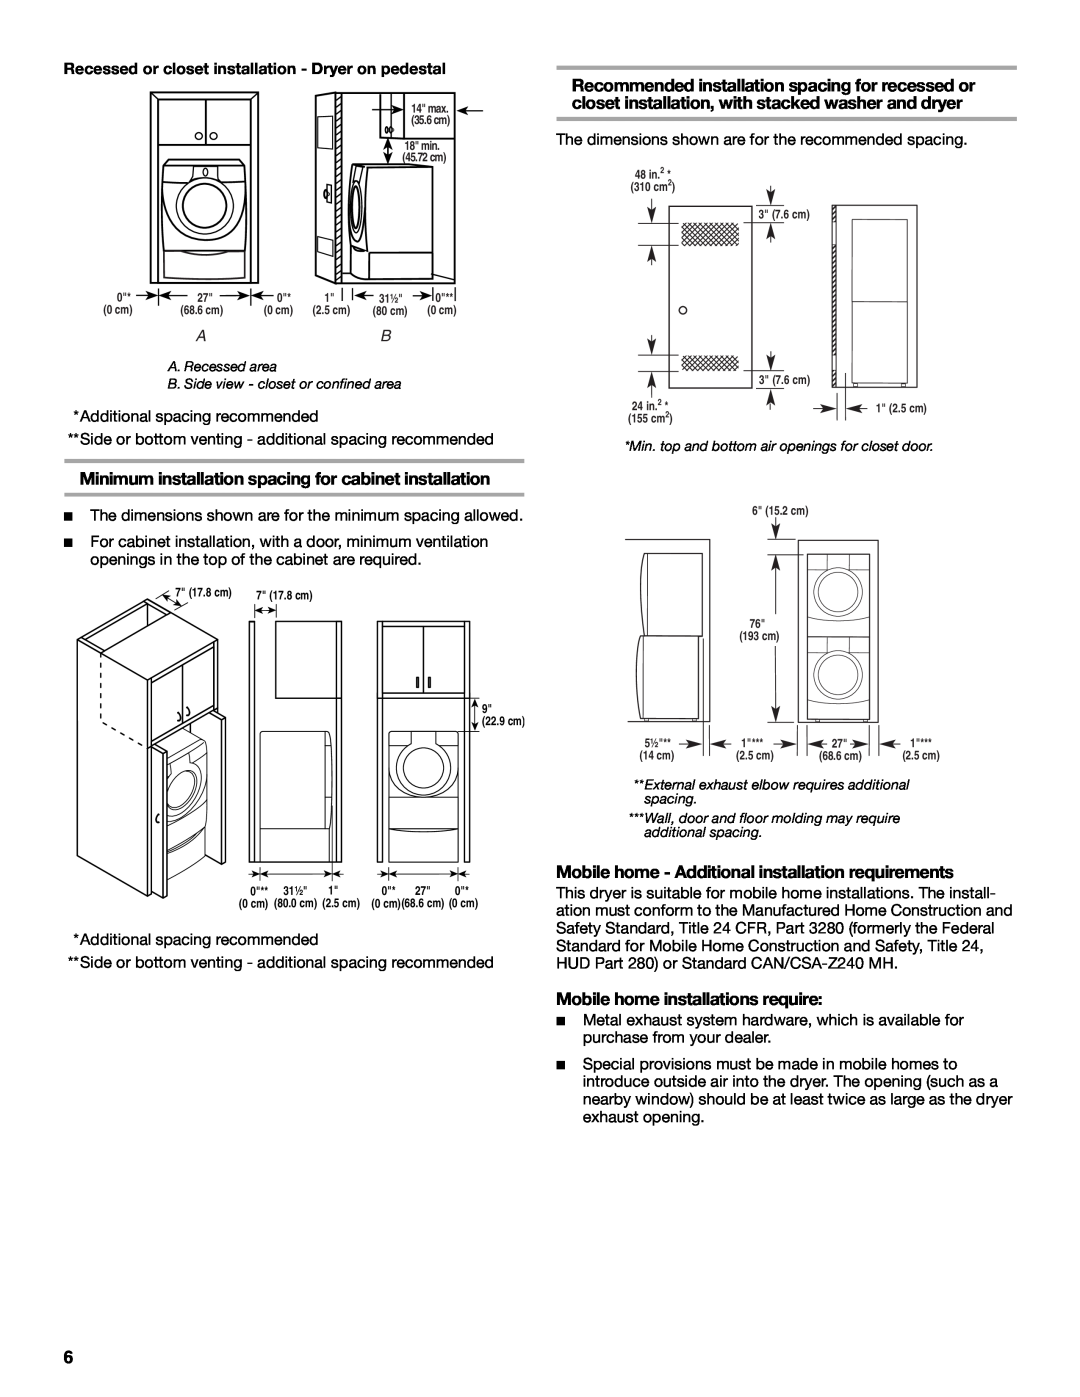 Whirlpool GEW9260PL1 manual Minimum installation spacing for cabinet installation, Mobile home installations require 